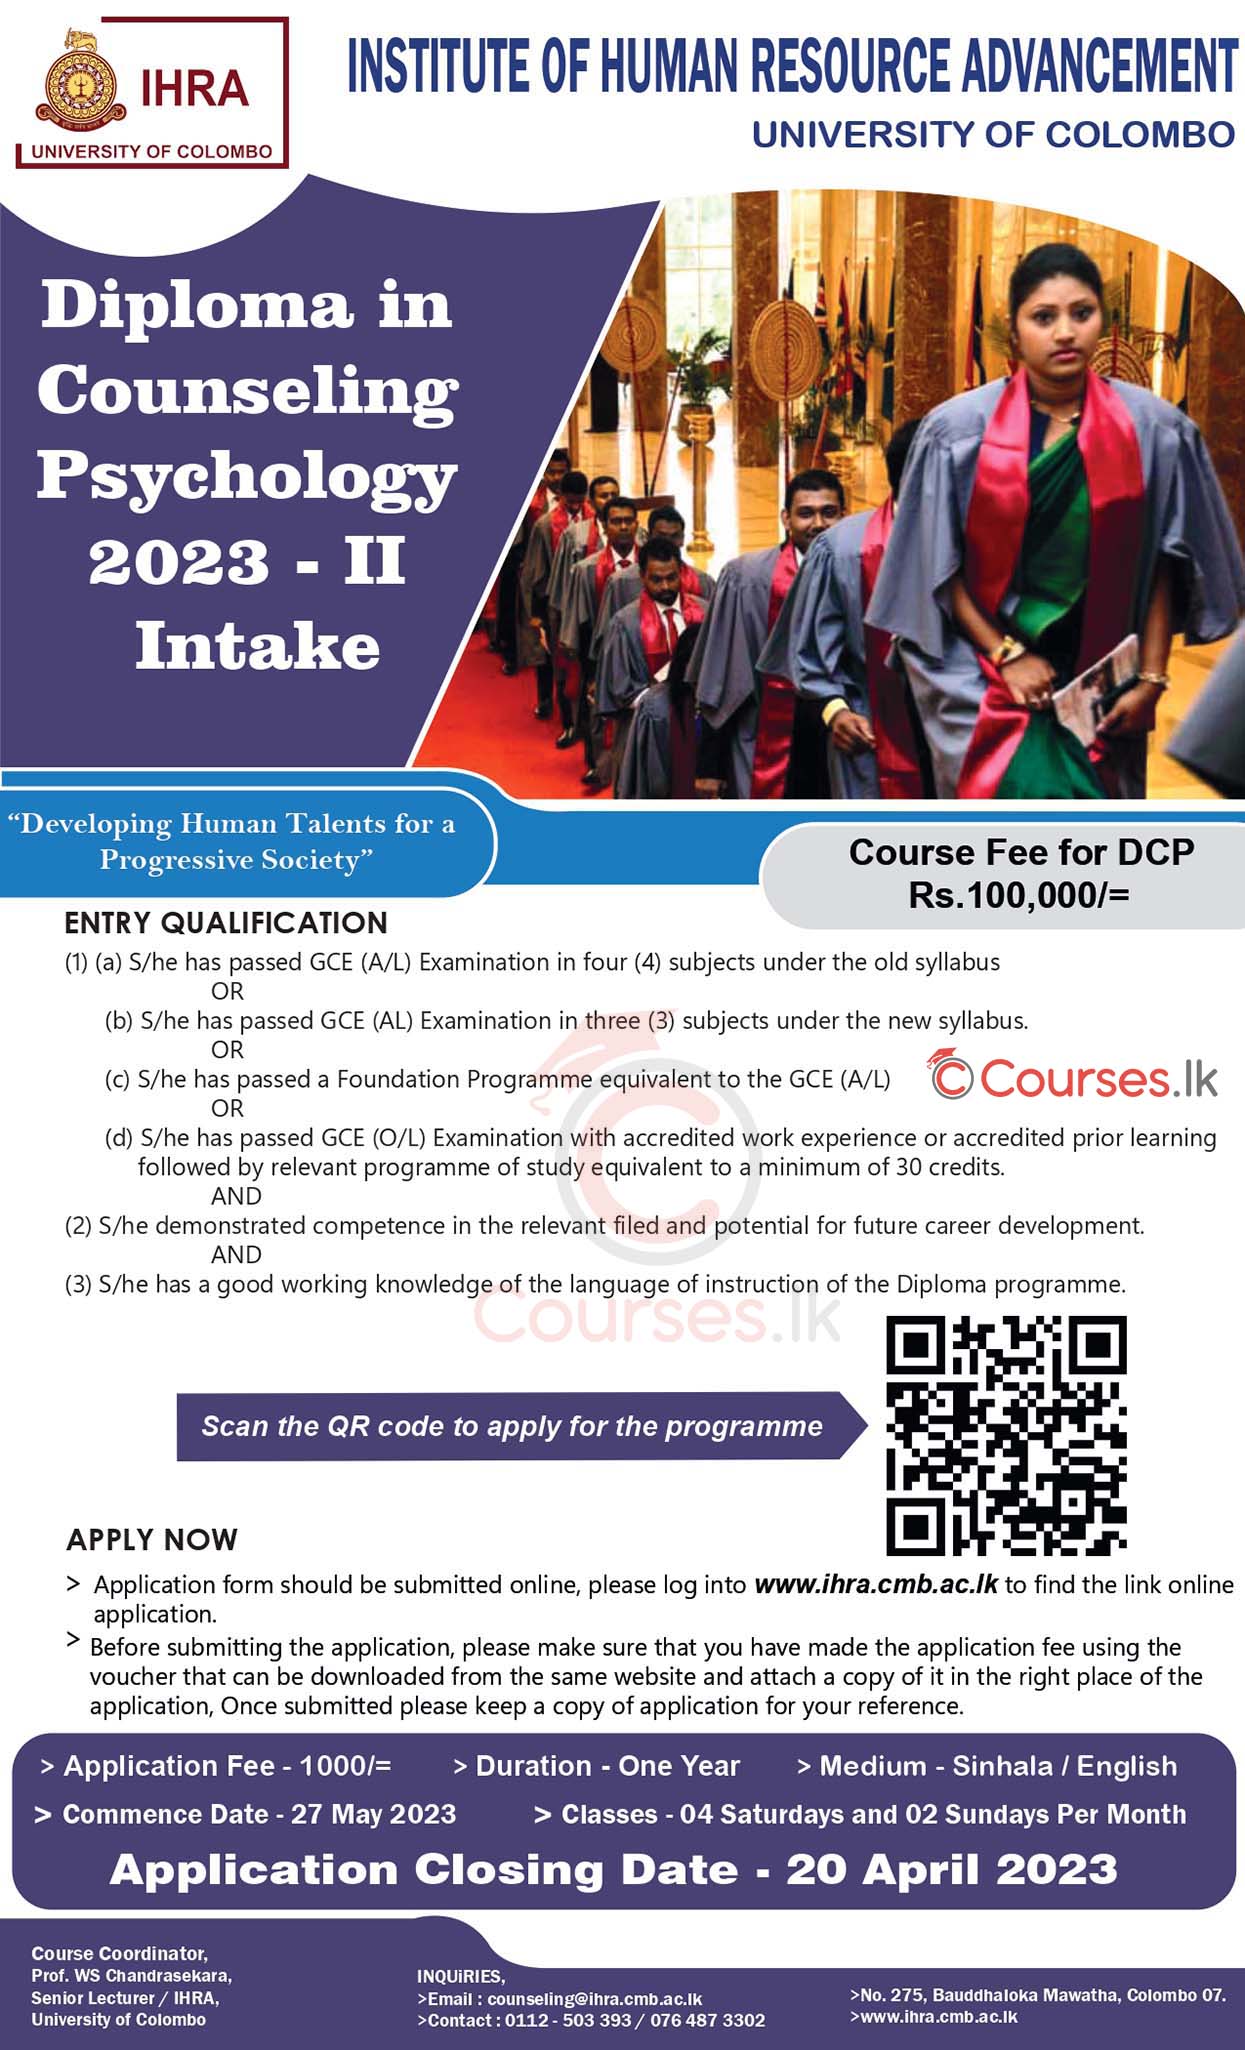 Diploma in Counseling Psychology 2023 - University of Colombo